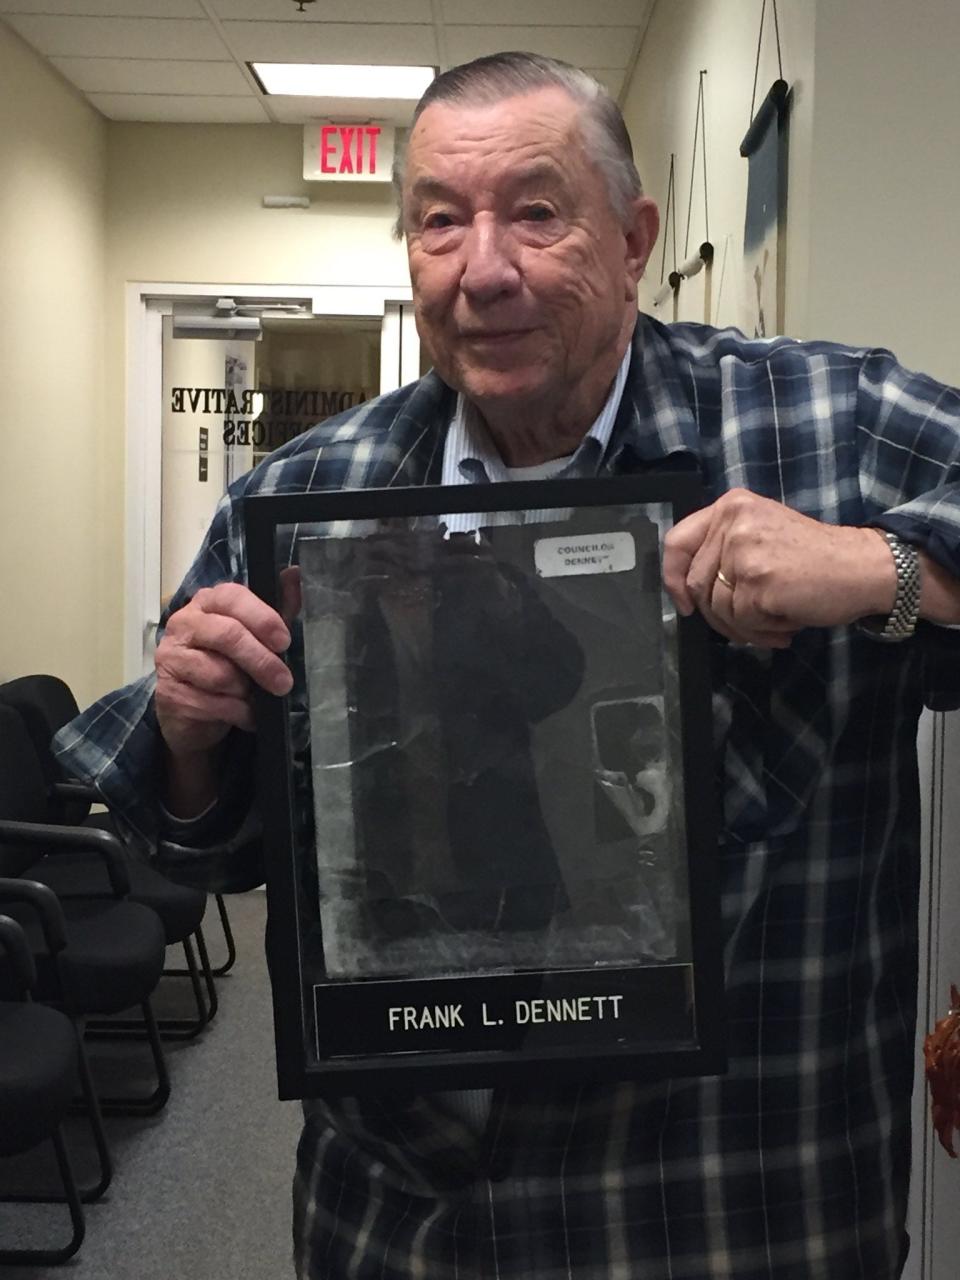 Frank Dennett, who served 29 years on the Kittery Town Council, died on July 30, 2022. In this photo, Dennett holds up his old Town Council packet folder, which is now on display in Kittery Town Hall on Rogers Road.